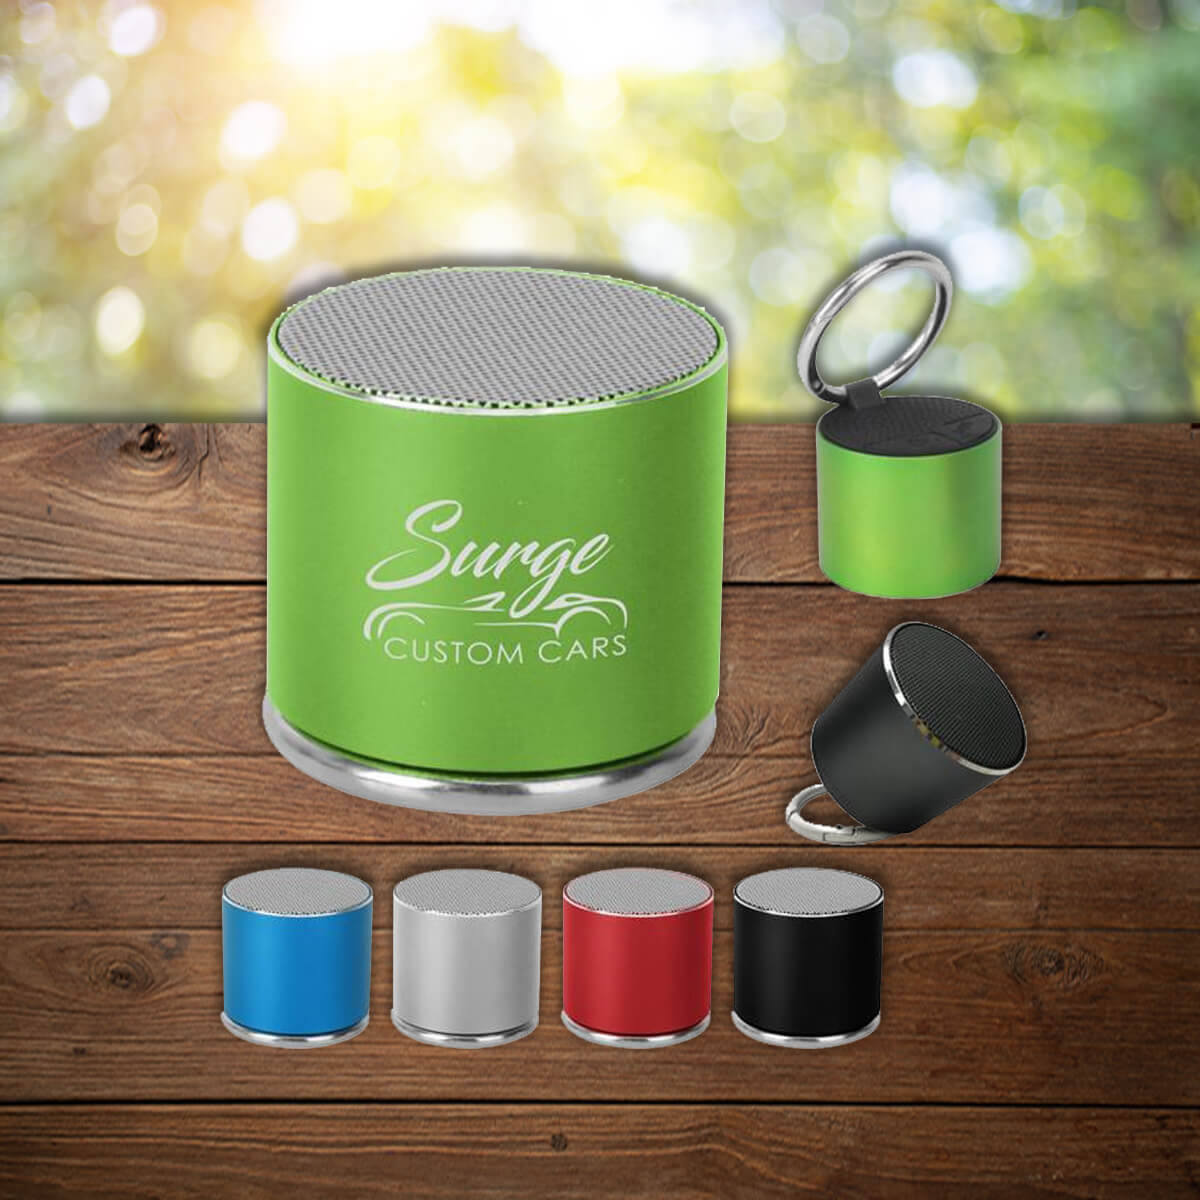 Small round chrome colored portable speaker promotional technology by curative printing